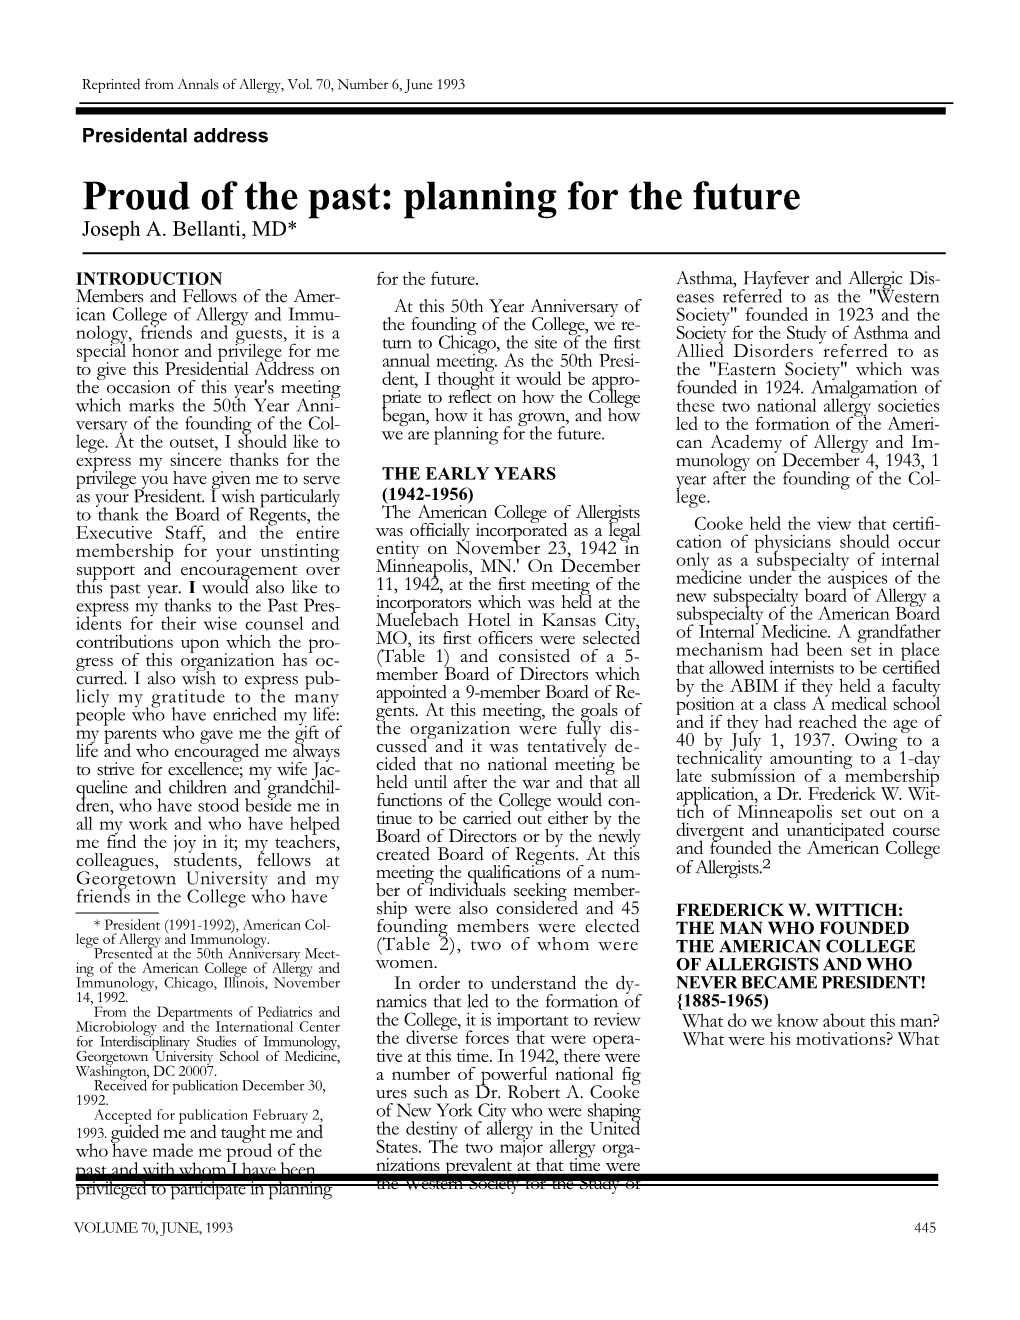 Proud of the Past: Planning for the Future Joseph A